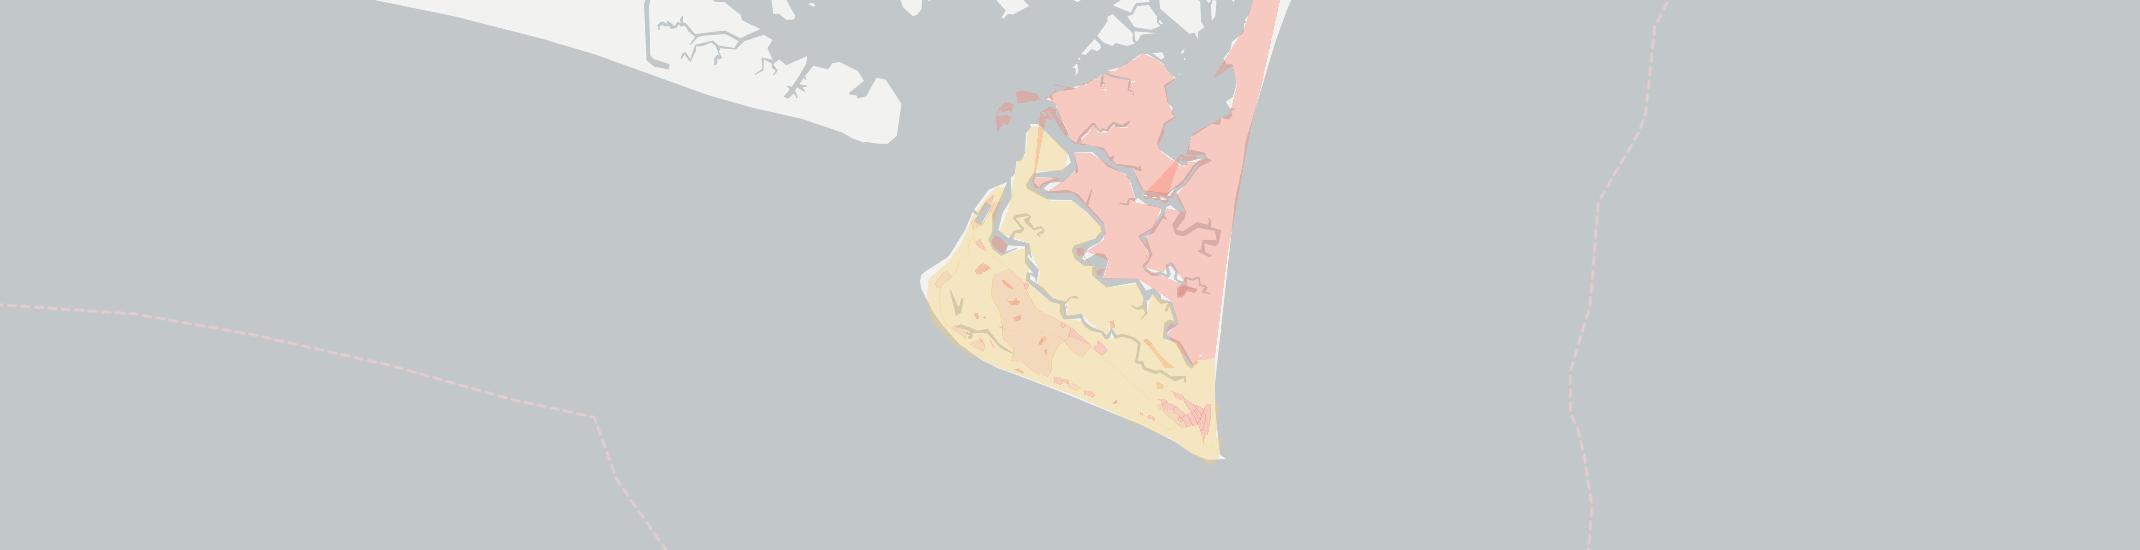 Bald Head Island Internet Competition Map. Click for interactive map.